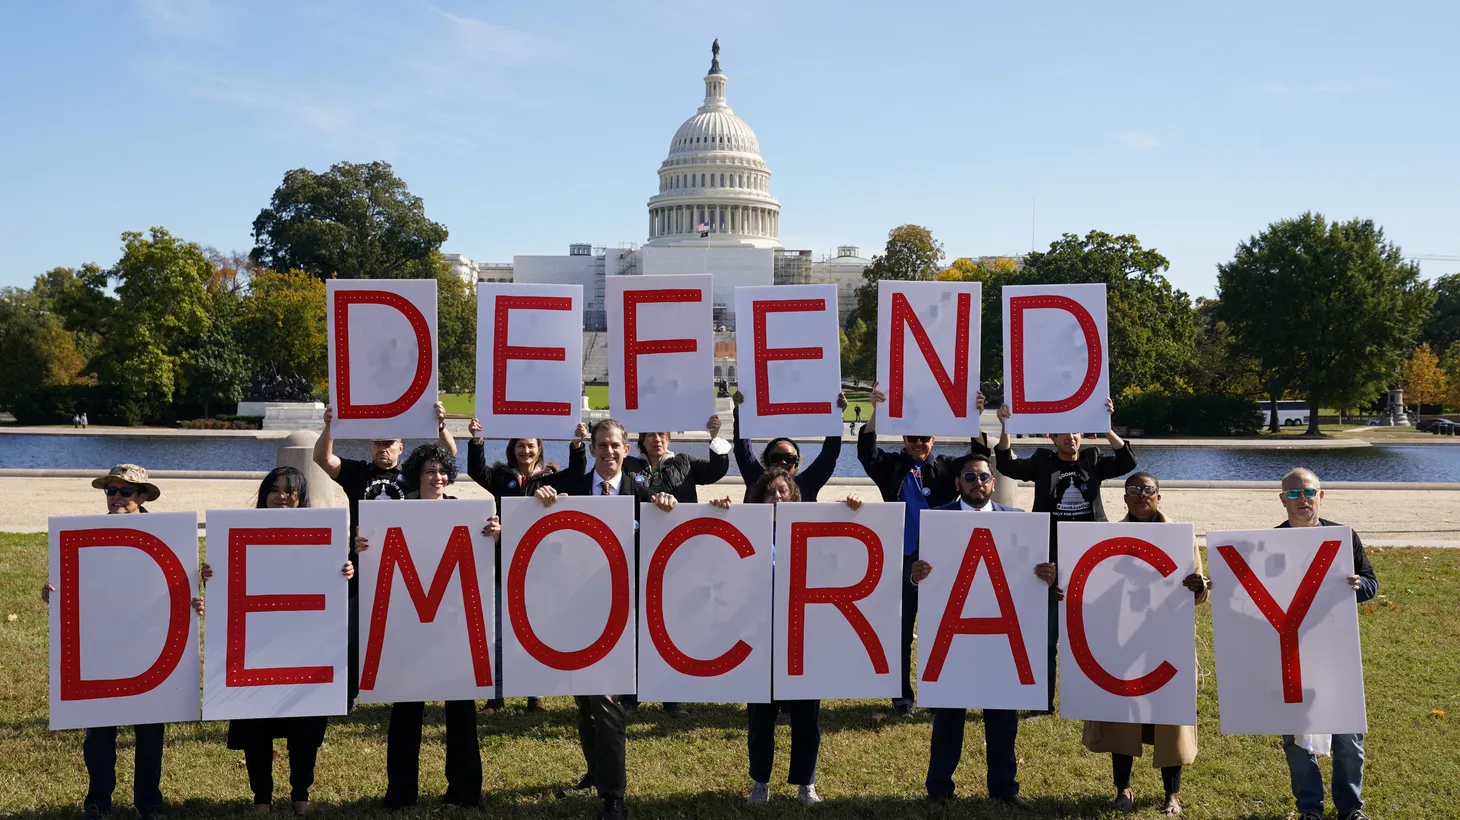 Activists hold up letters spelling “defend democracy” during a rally amid revelations by the Jan. 6 select committee, in front of the U.S. Capitol, in Washington, U.S., October 20, 2022.